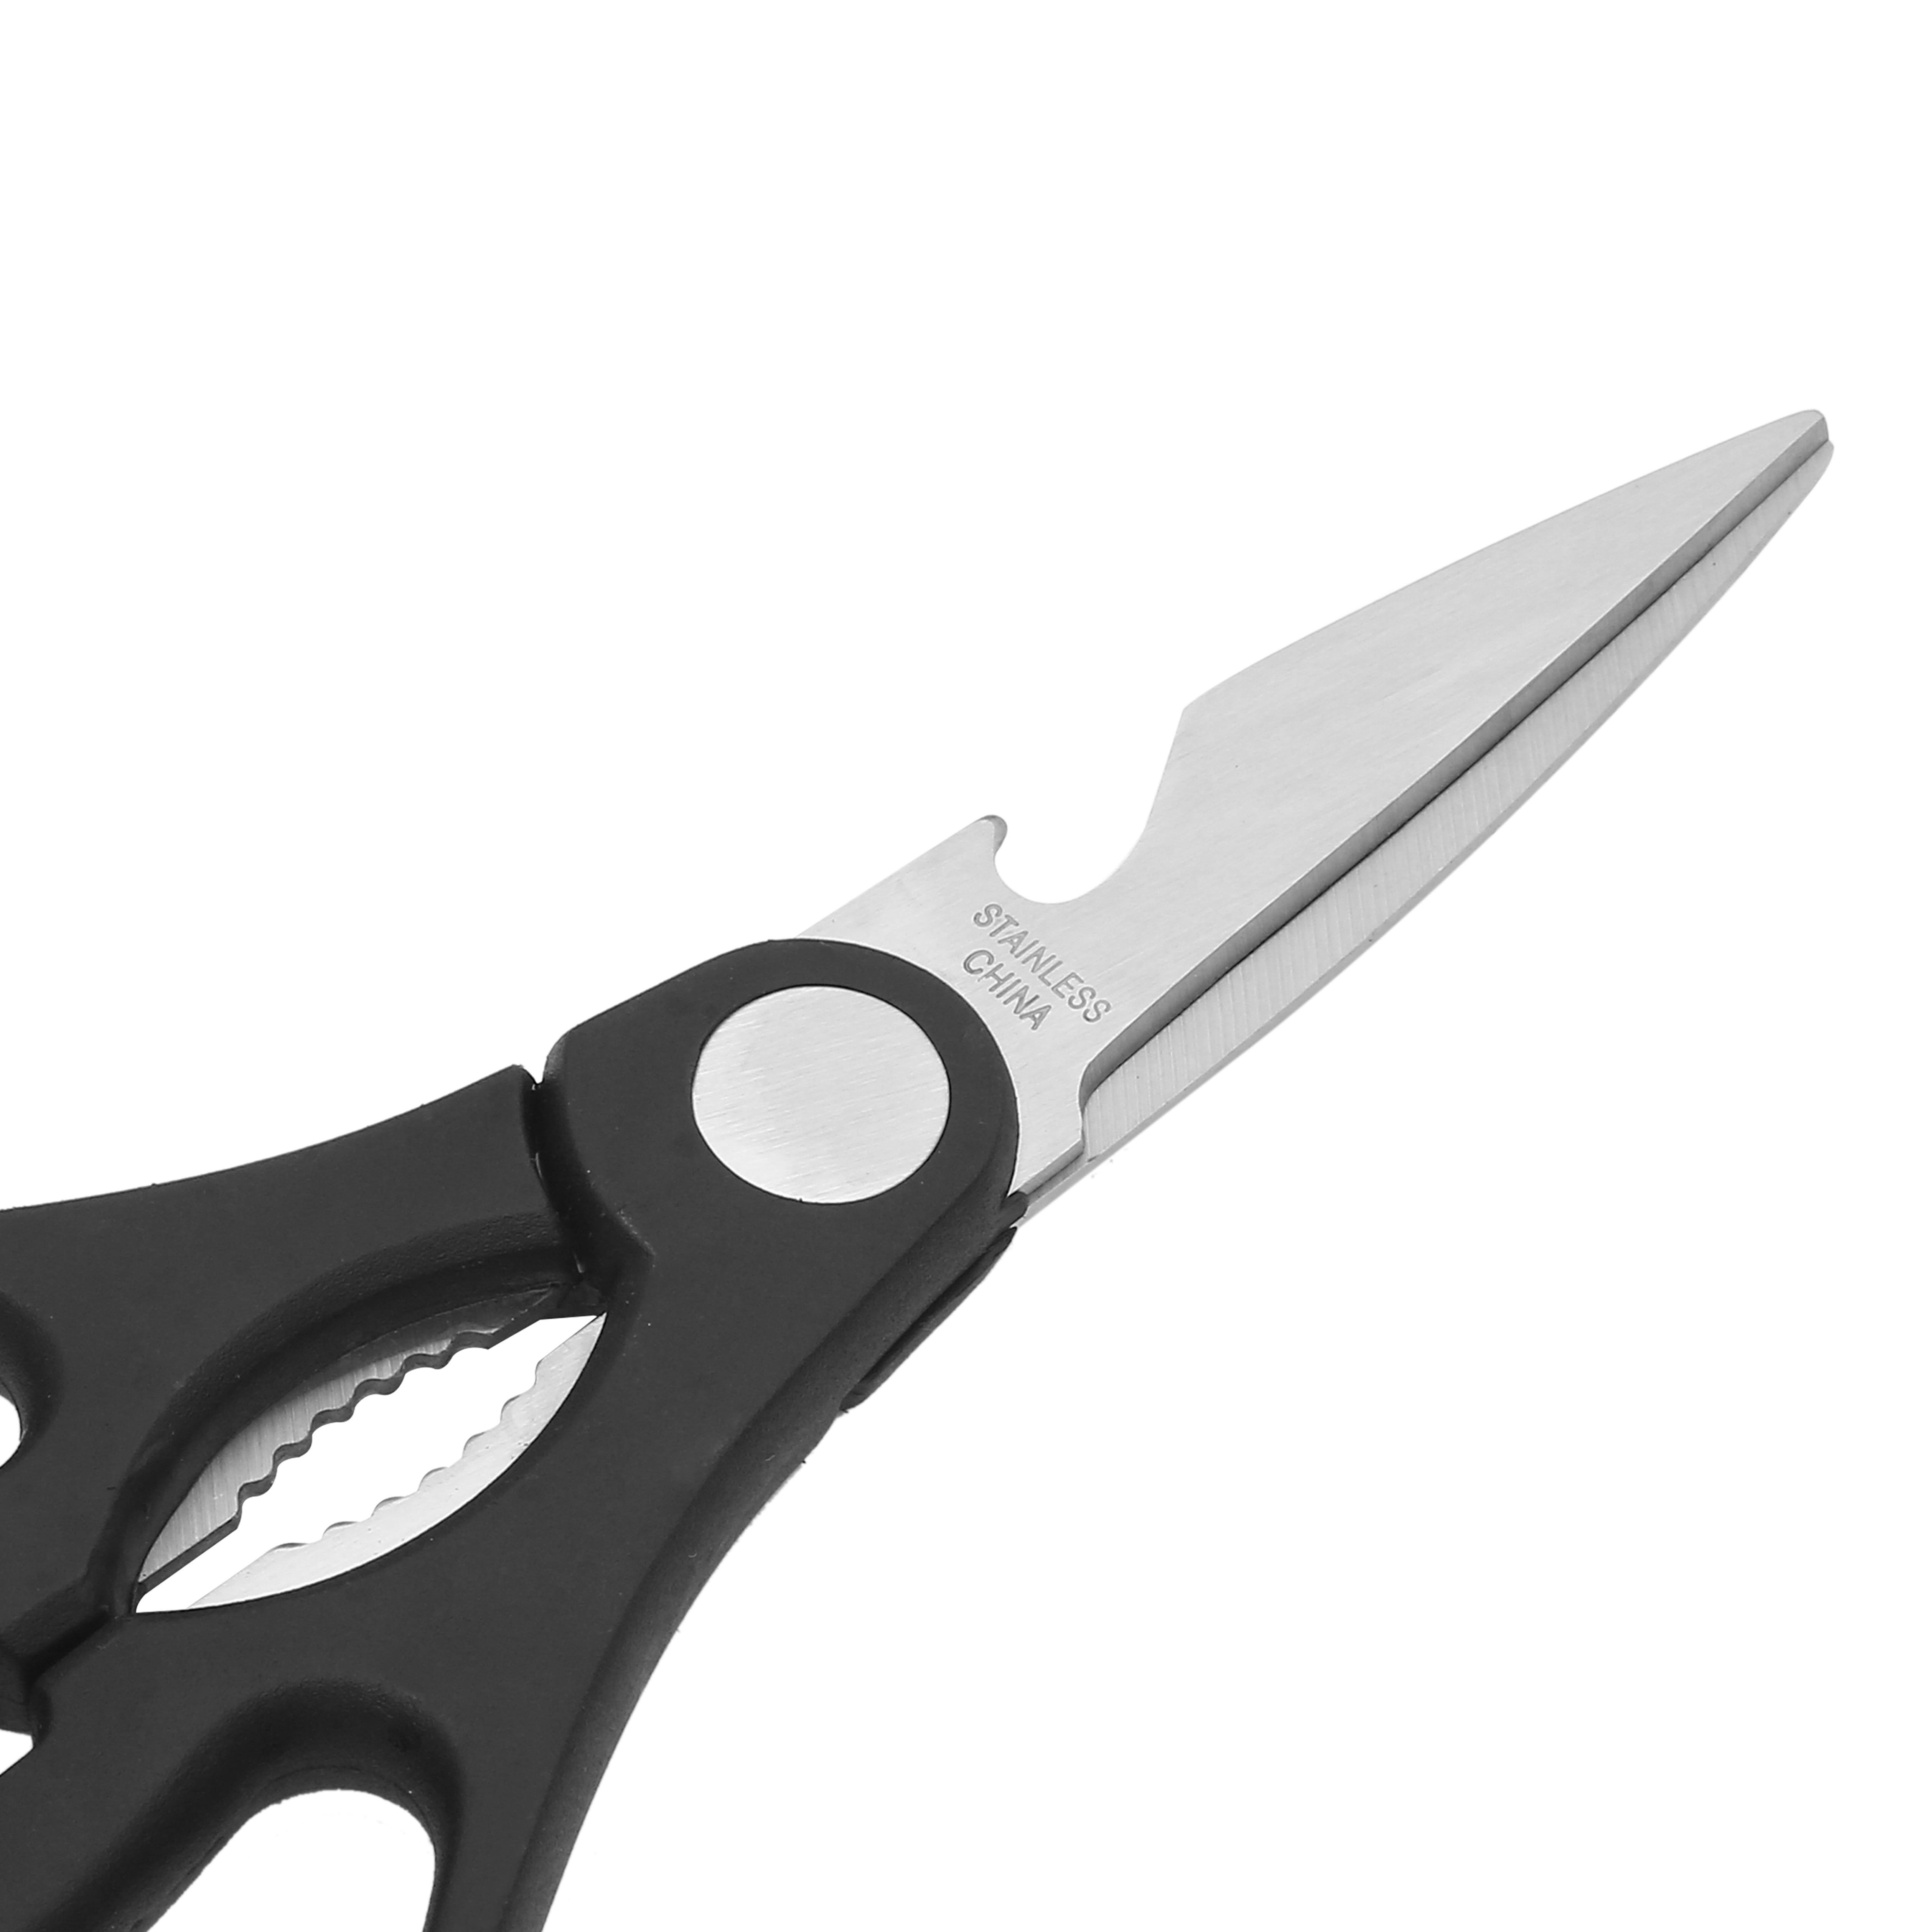 General Purpose Stainless Steel Scissors by Universal® UNV92019